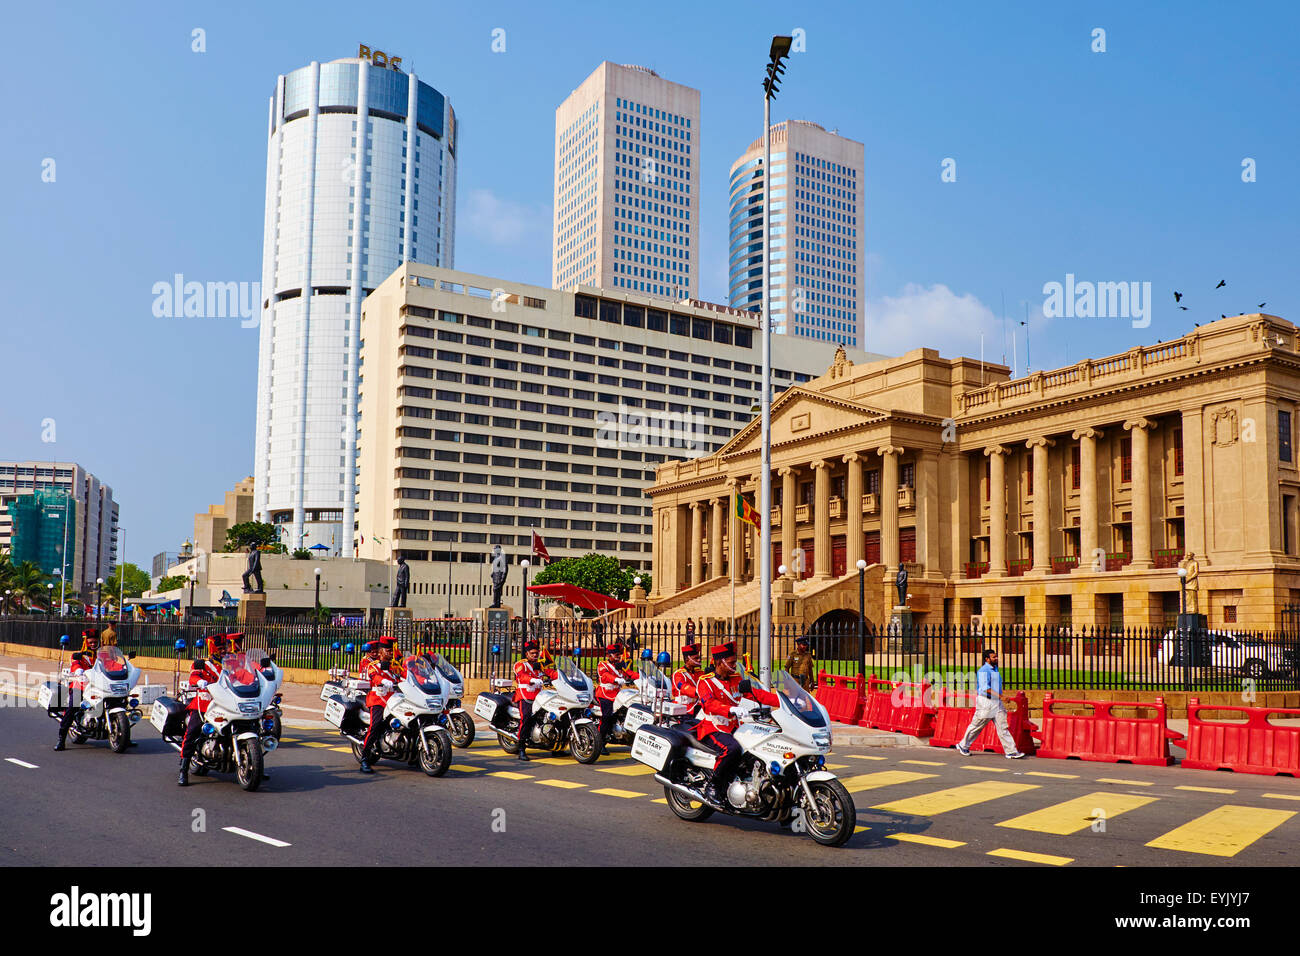 Sri Lanka, Colombo, Old city, Fort, Ancient Parliament Building, military parade Stock Photo